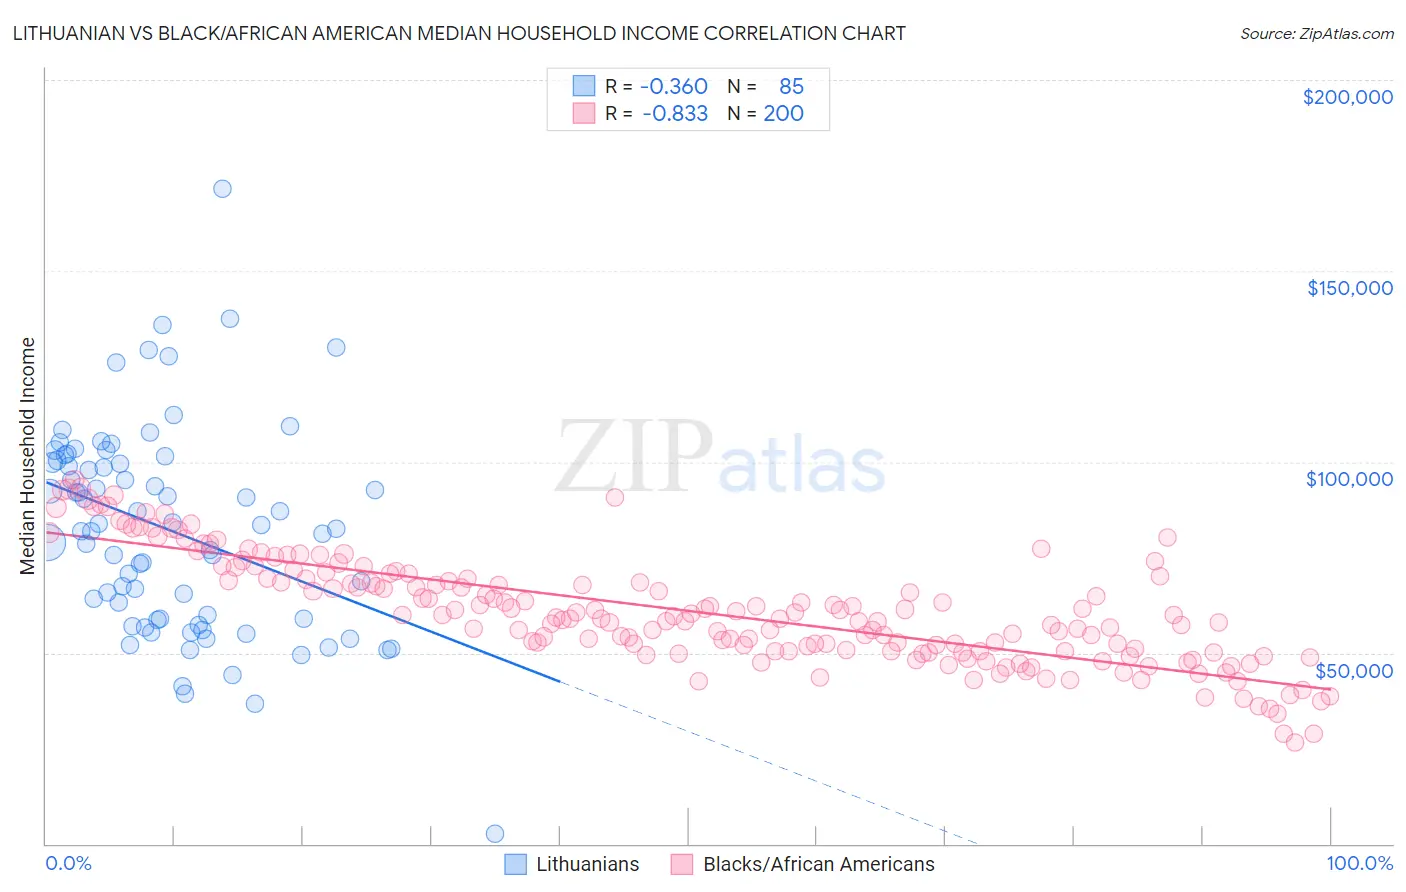 Lithuanian vs Black/African American Median Household Income